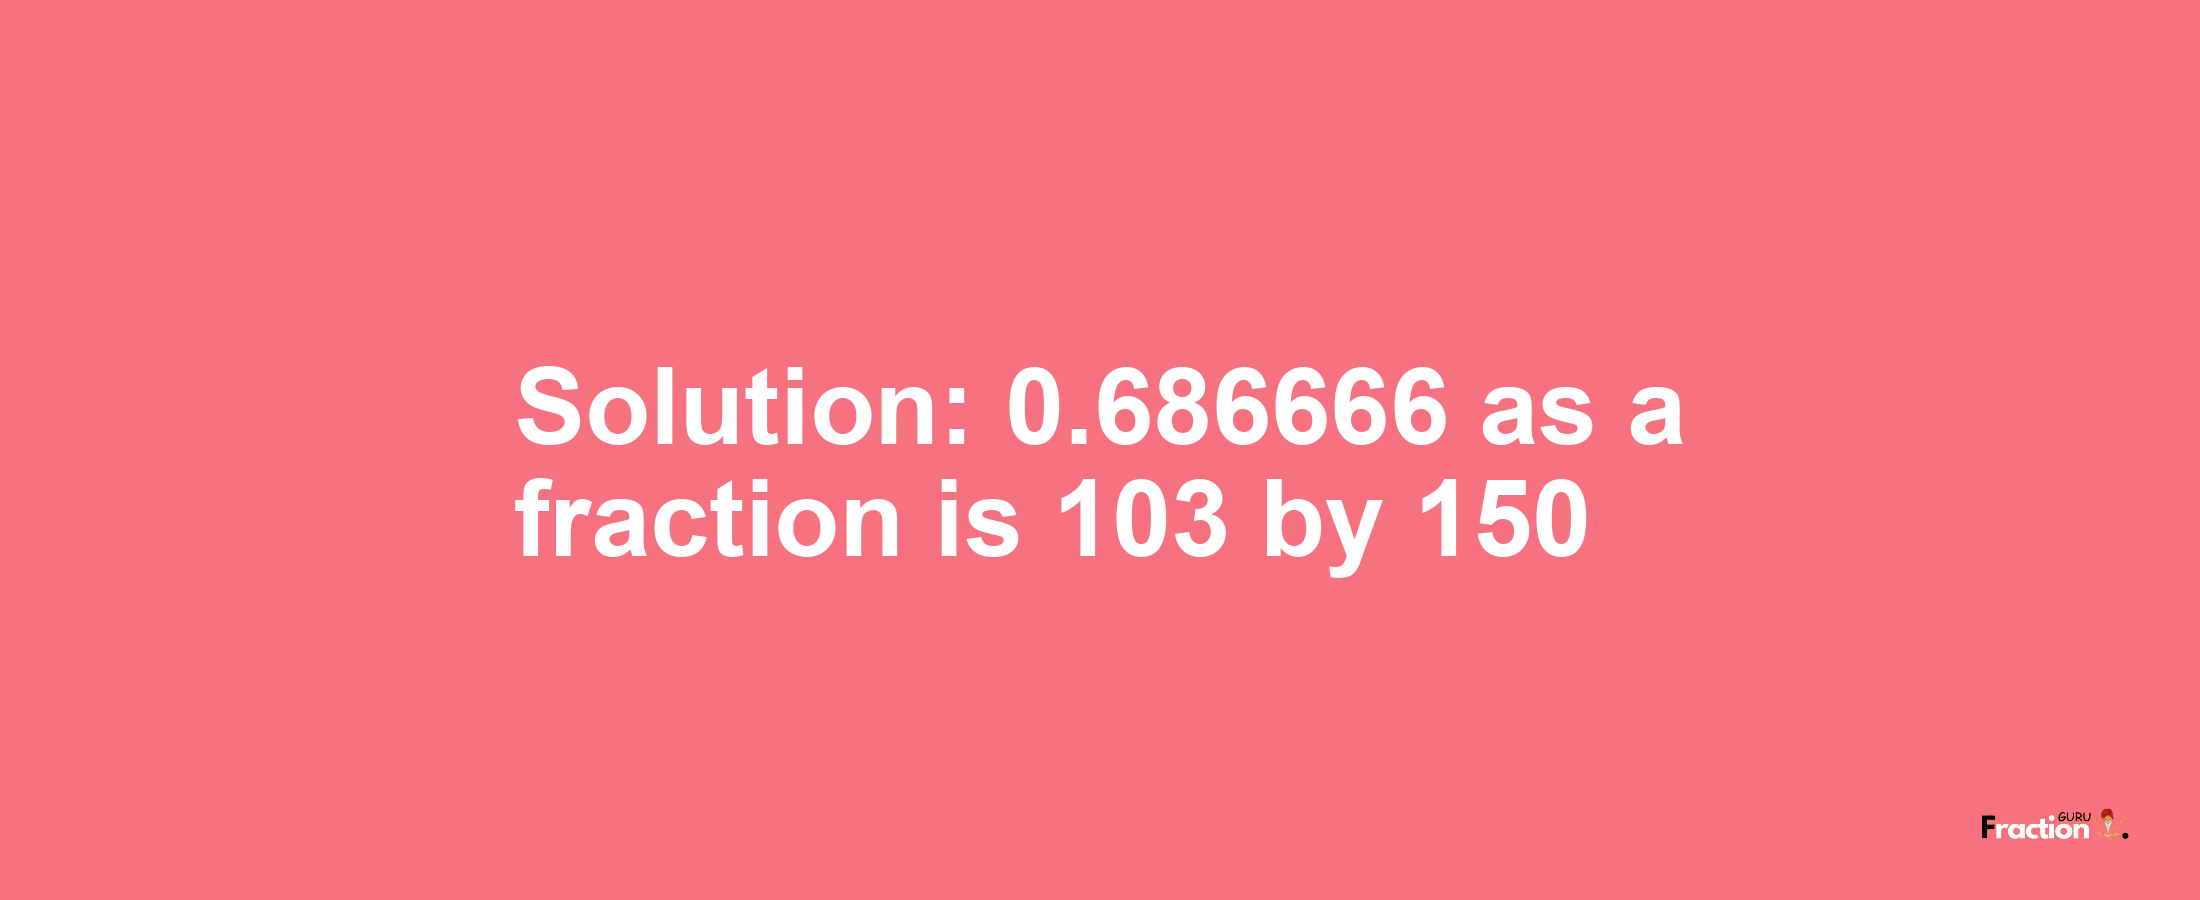 Solution:0.686666 as a fraction is 103/150